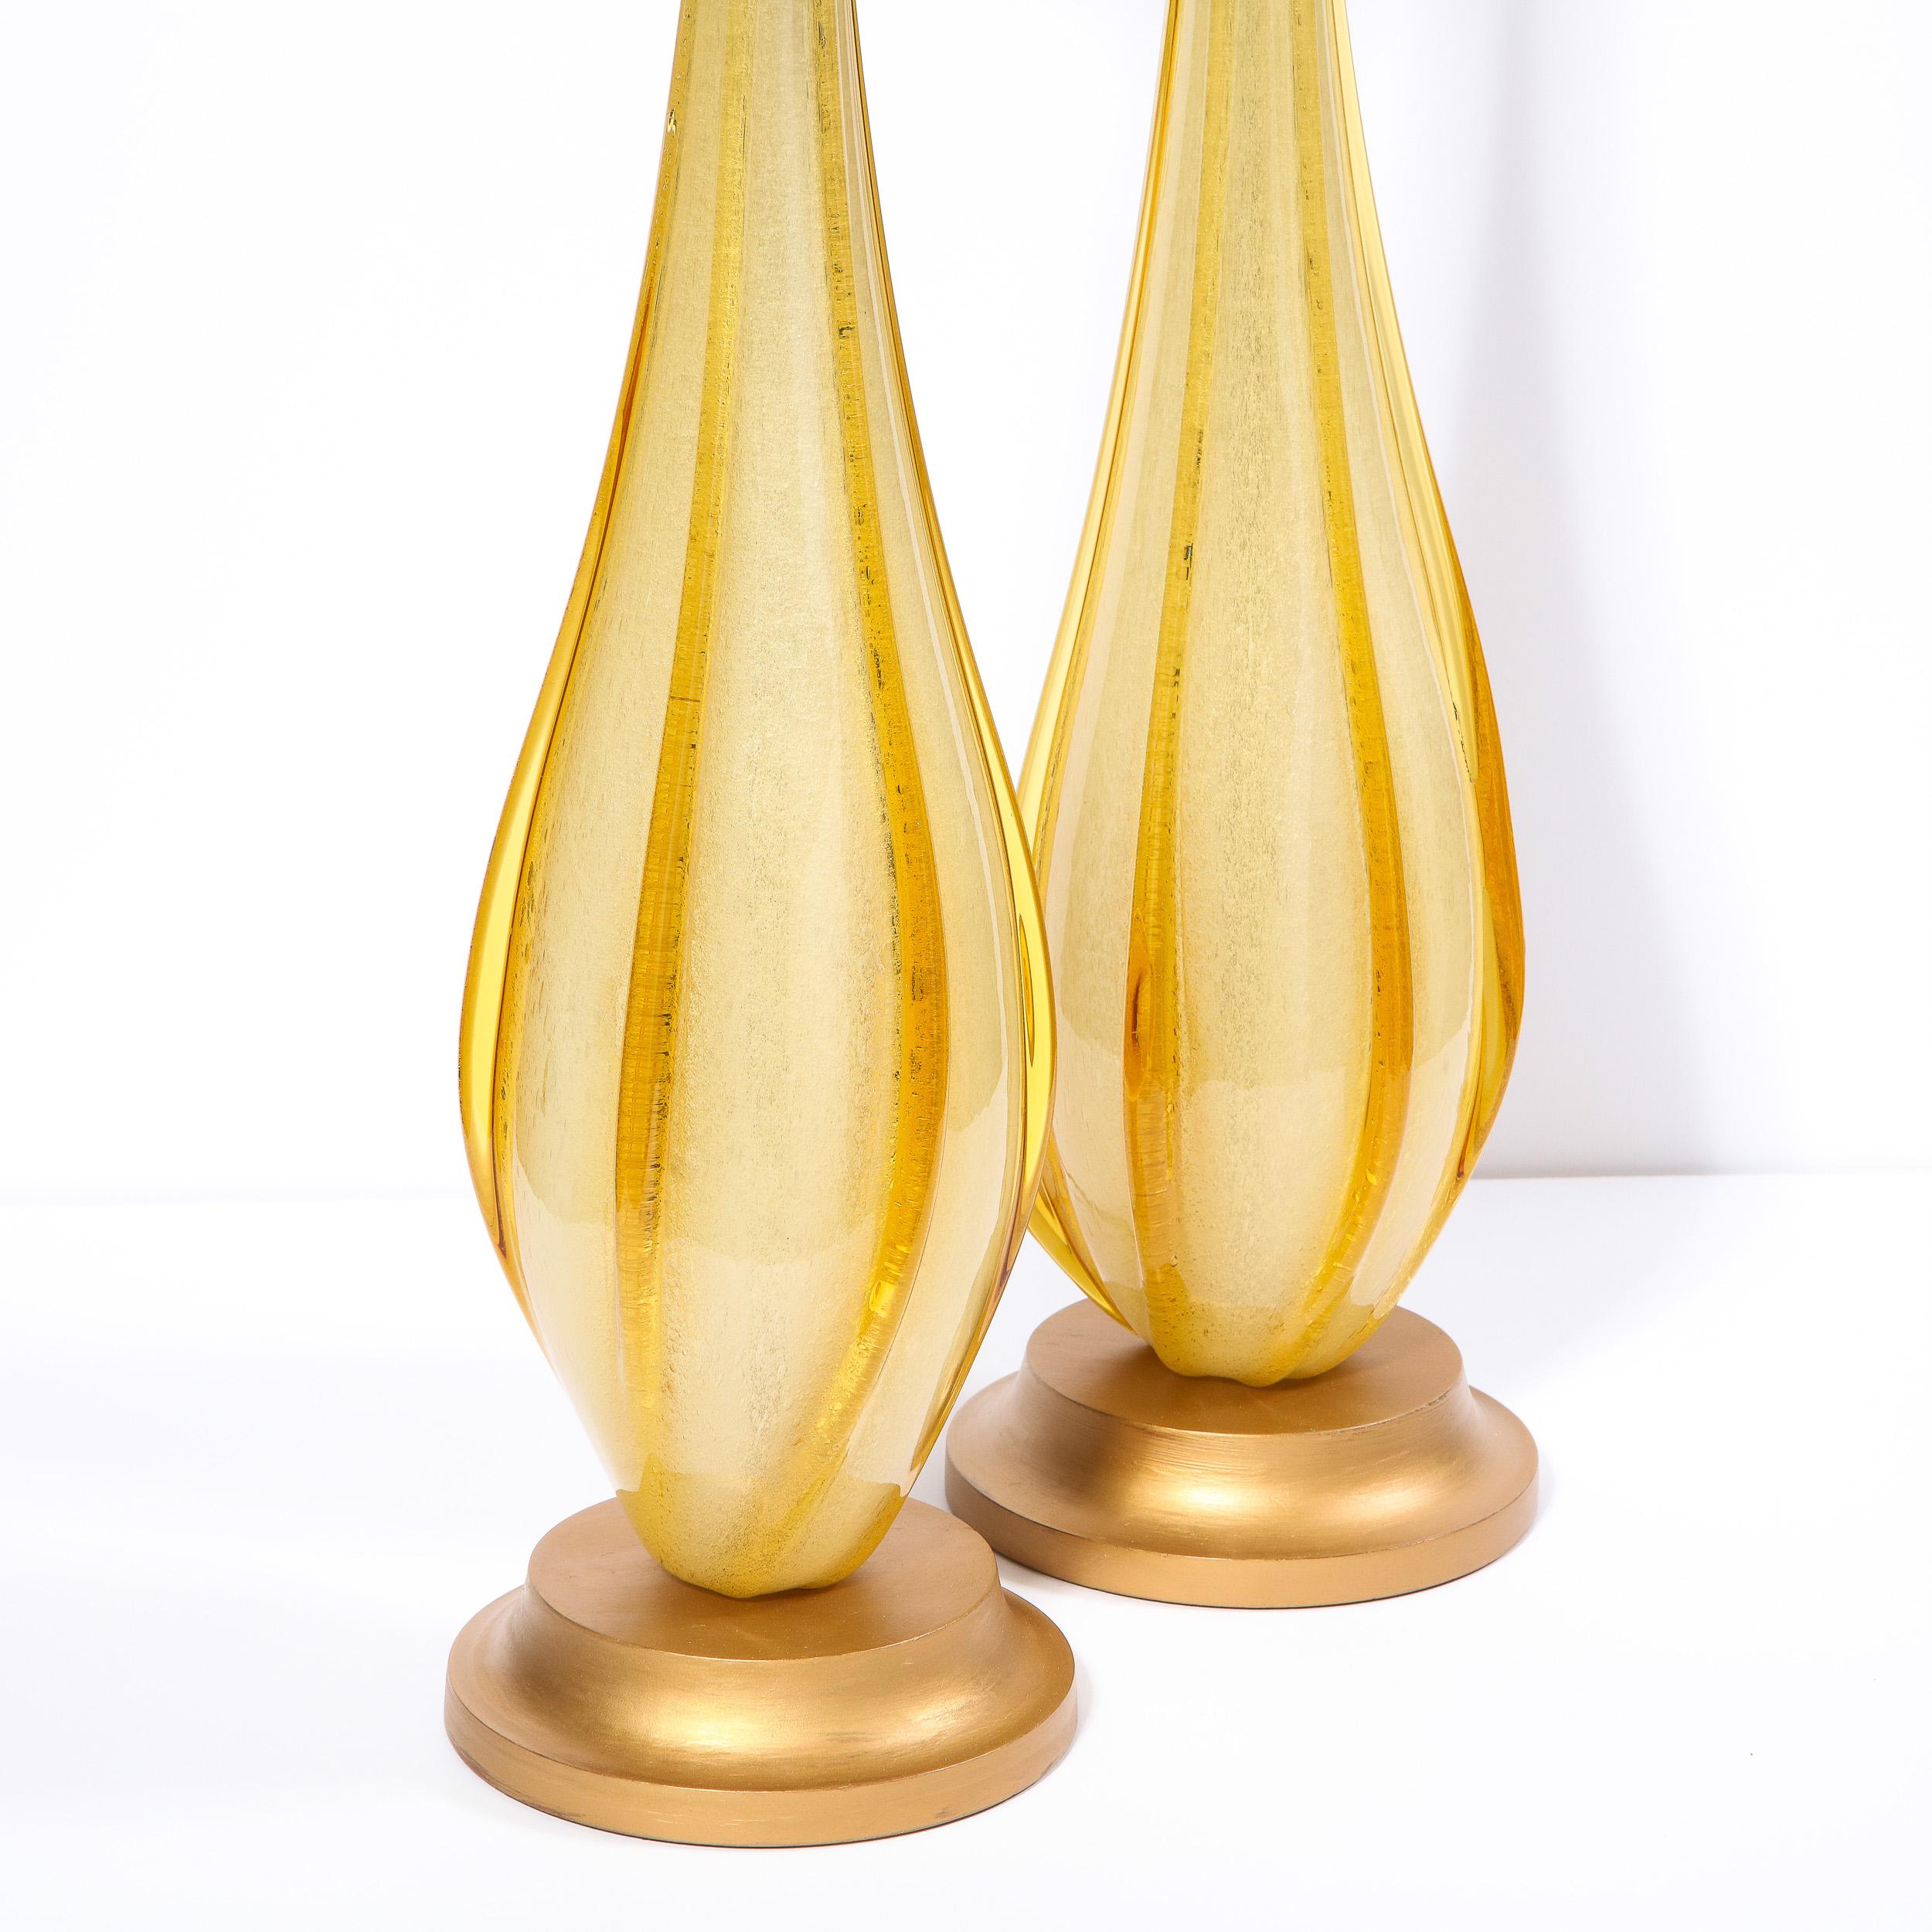 Pair of Mid-Century Modern Handblown Murano Table Lamps with Brass Fittings 1